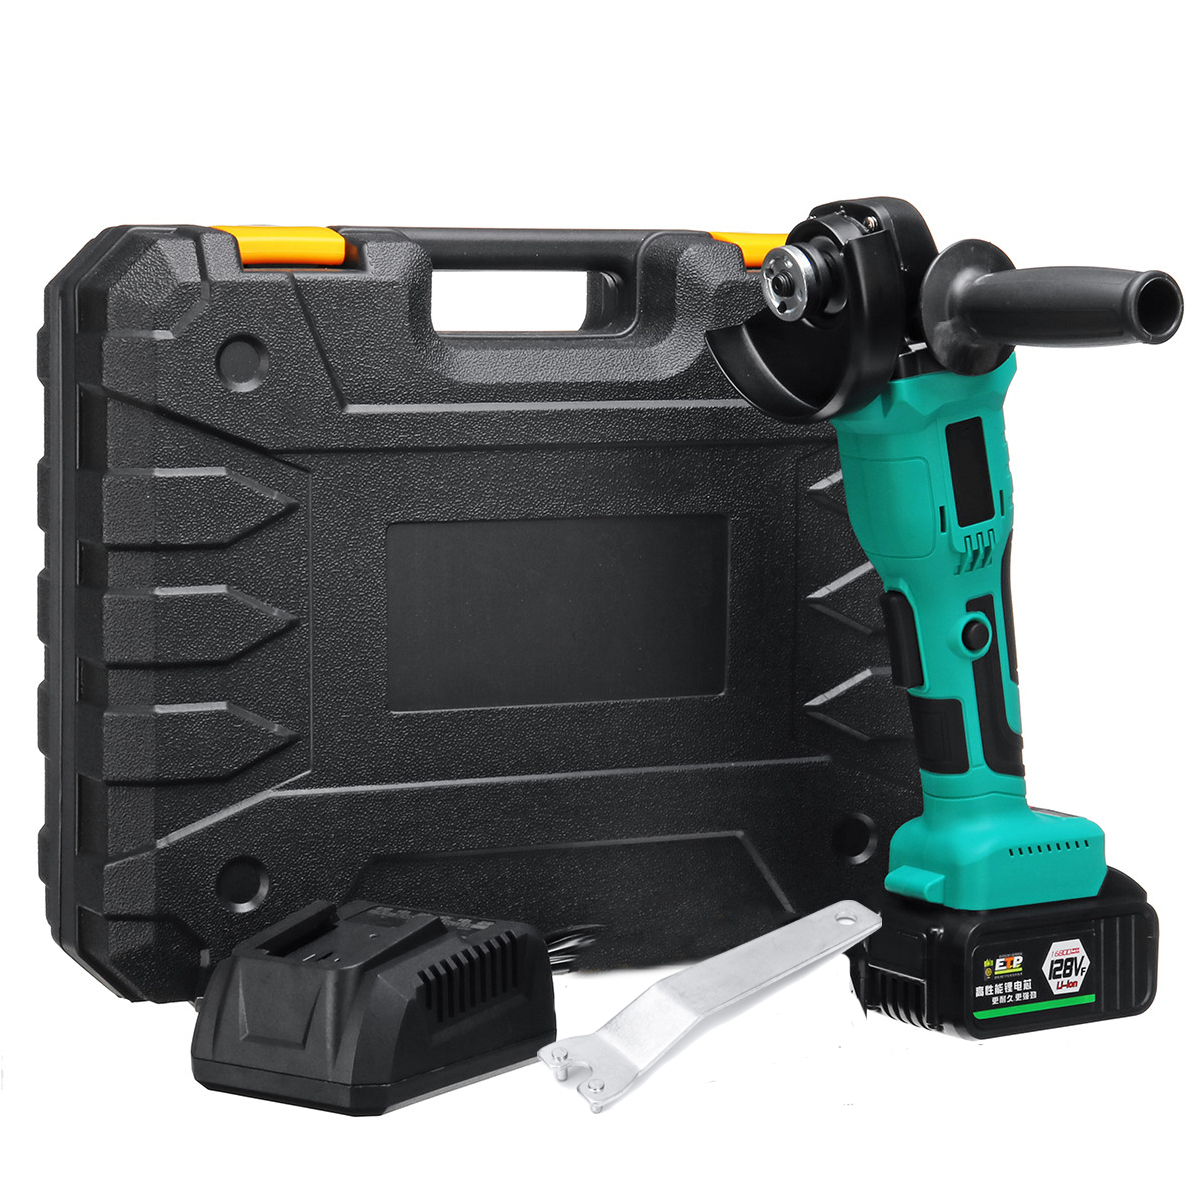 128VF-1300W-10000RPM-Cordless-Brushless-Angle-Grinder-with-16800mAh-Li-Ion-Battery-1520444-10